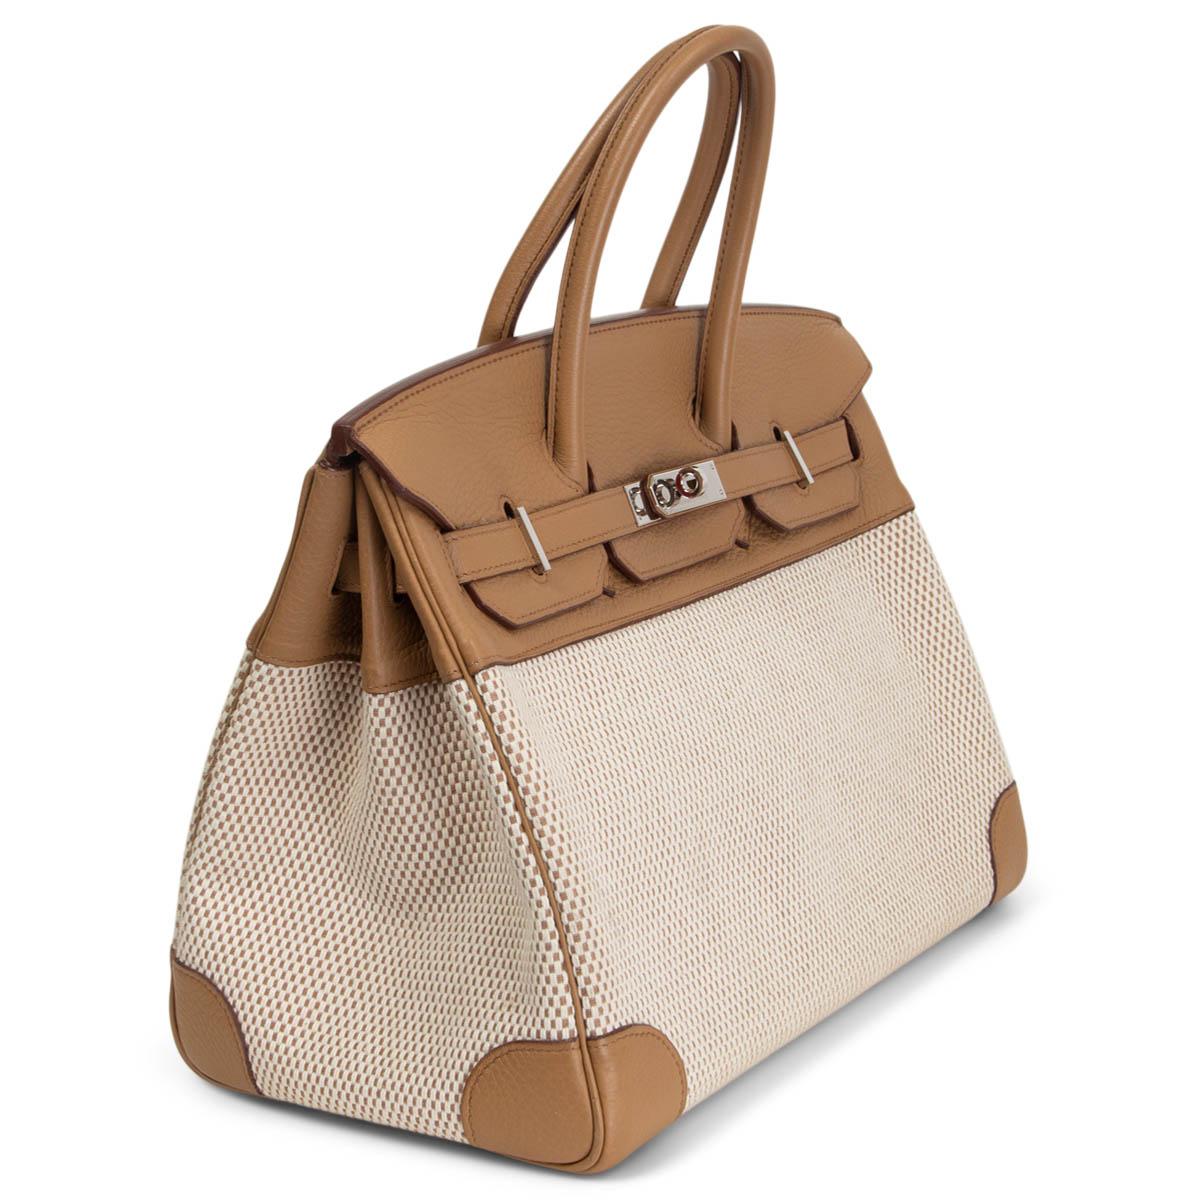 100% authentic Hermès Birkin 35 bag in Tabac-Camel Taurillon Clemence leather (soft, structured) and cashmere Toile Criss Cross (larger weave than normal Toile H). Extremely rare combination. Lined in Chevre (goat skin) with an open pocket against